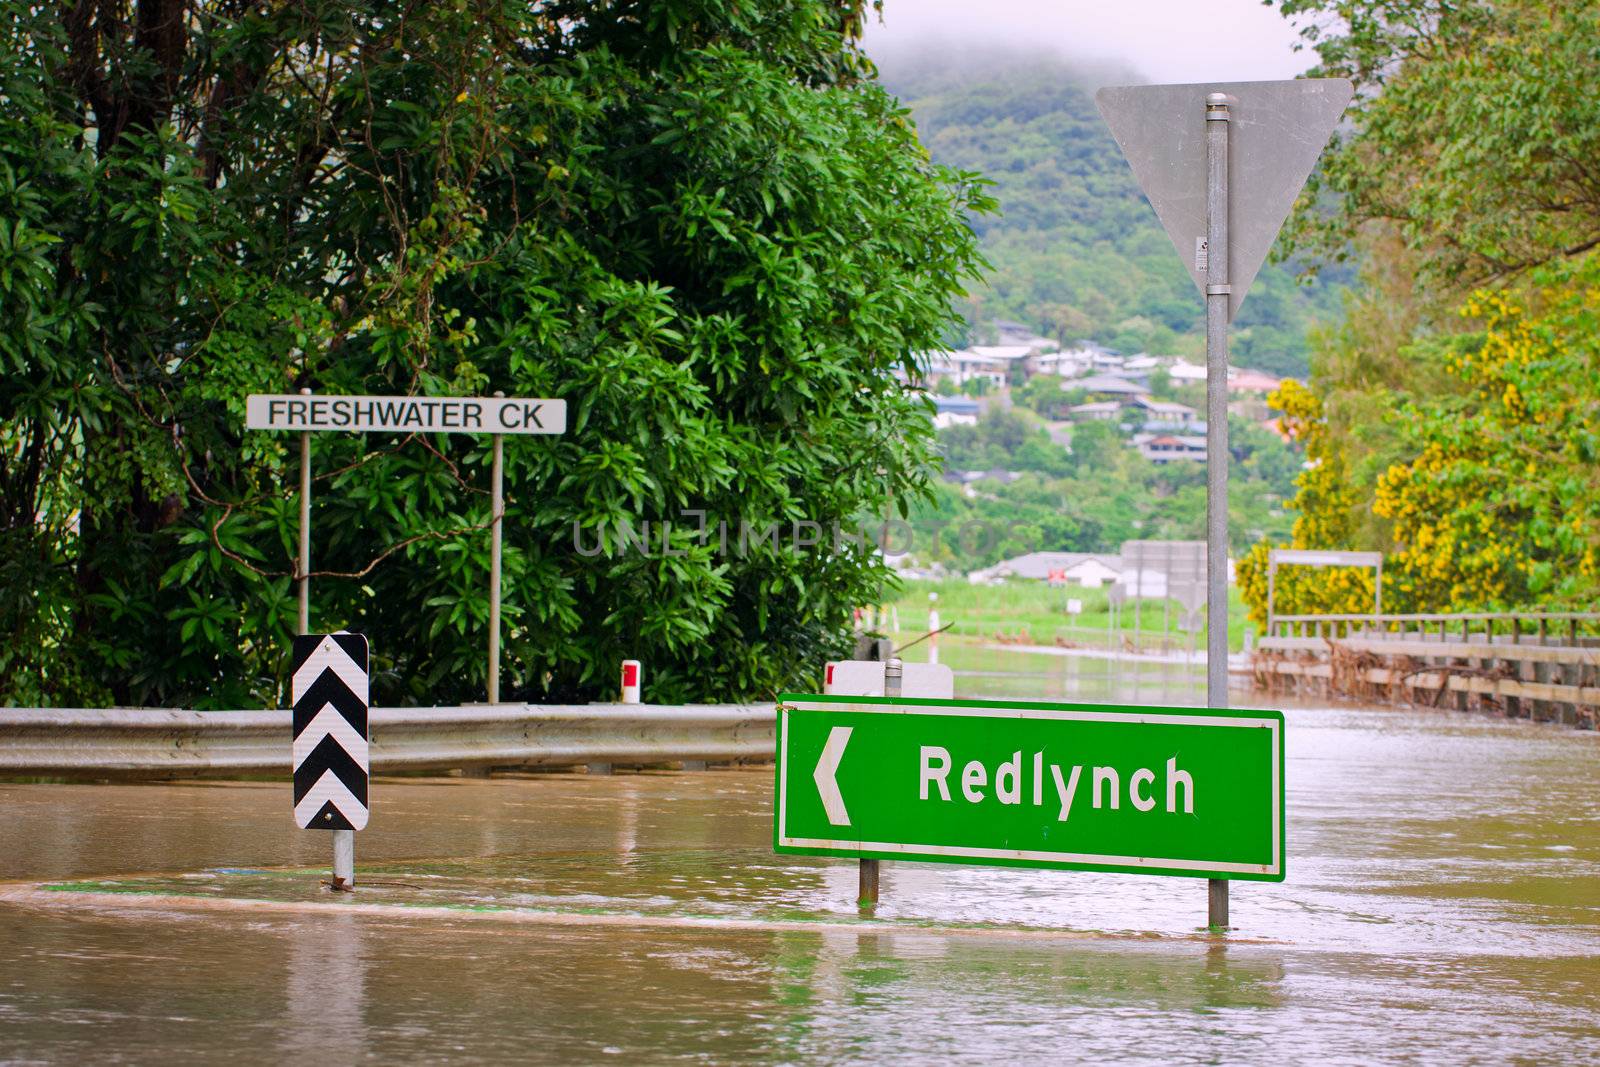 Flooded roundabout and bridge in Queensland, Australia by Jaykayl